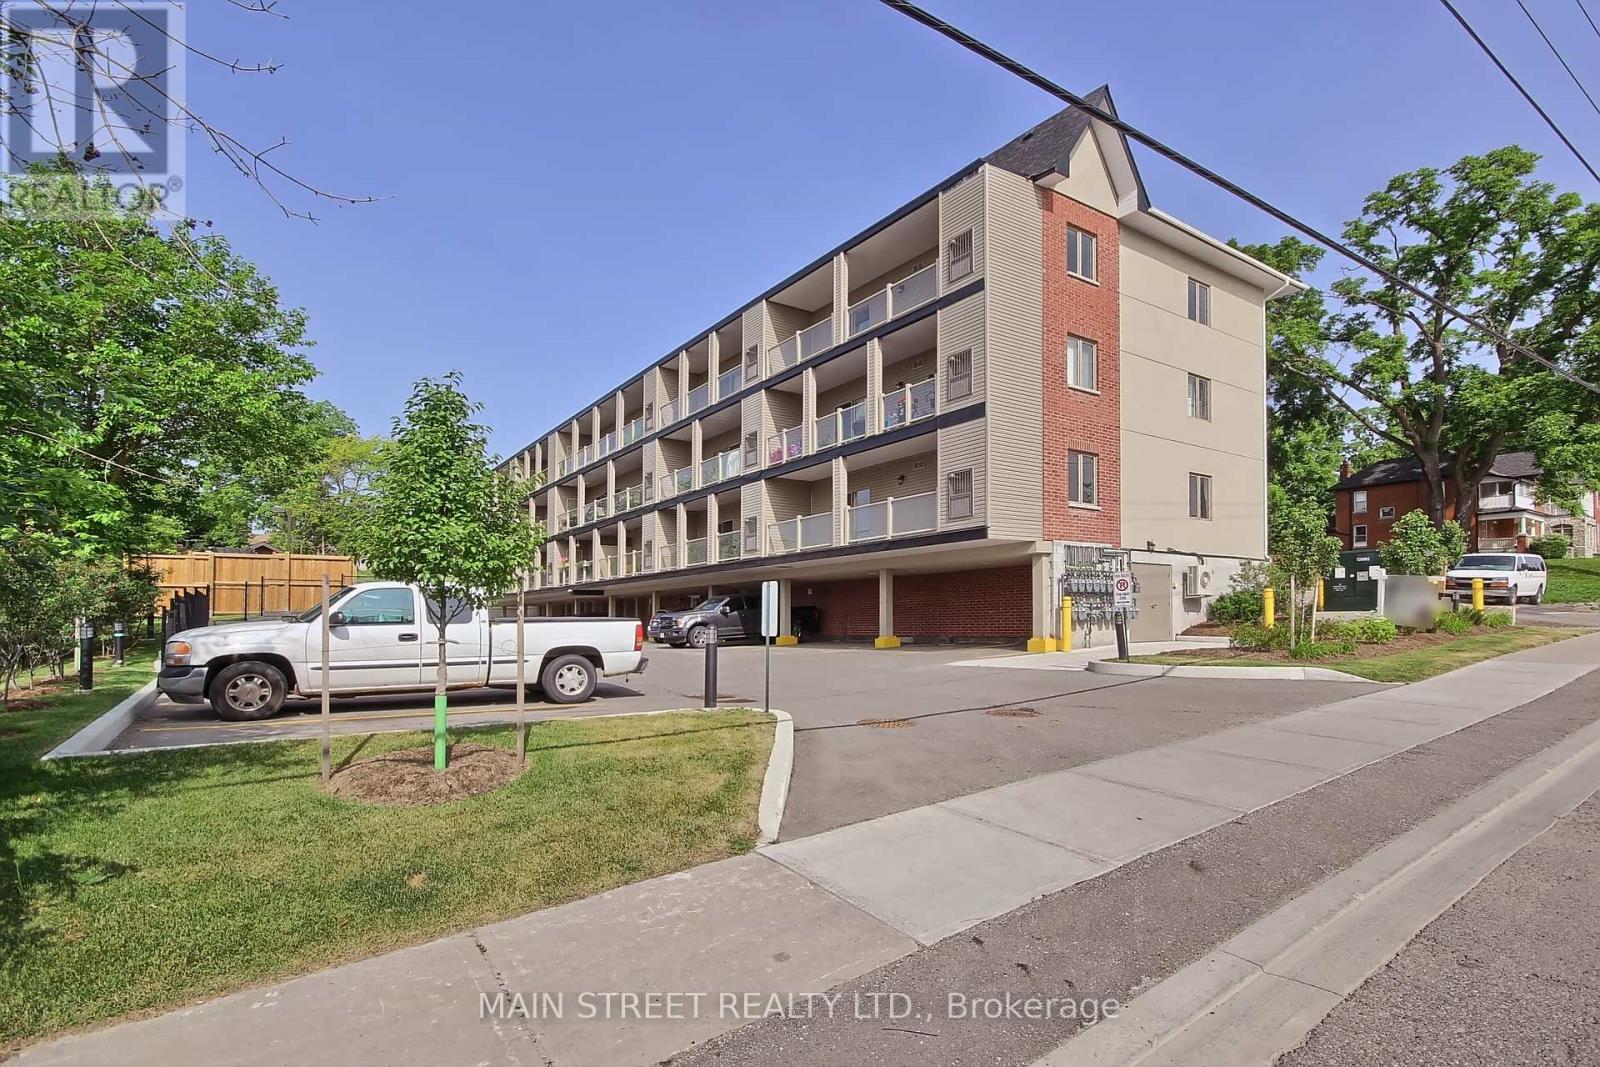 #101 -128 BARRIE ST located in Bradford West Gwillimbury, Ontario